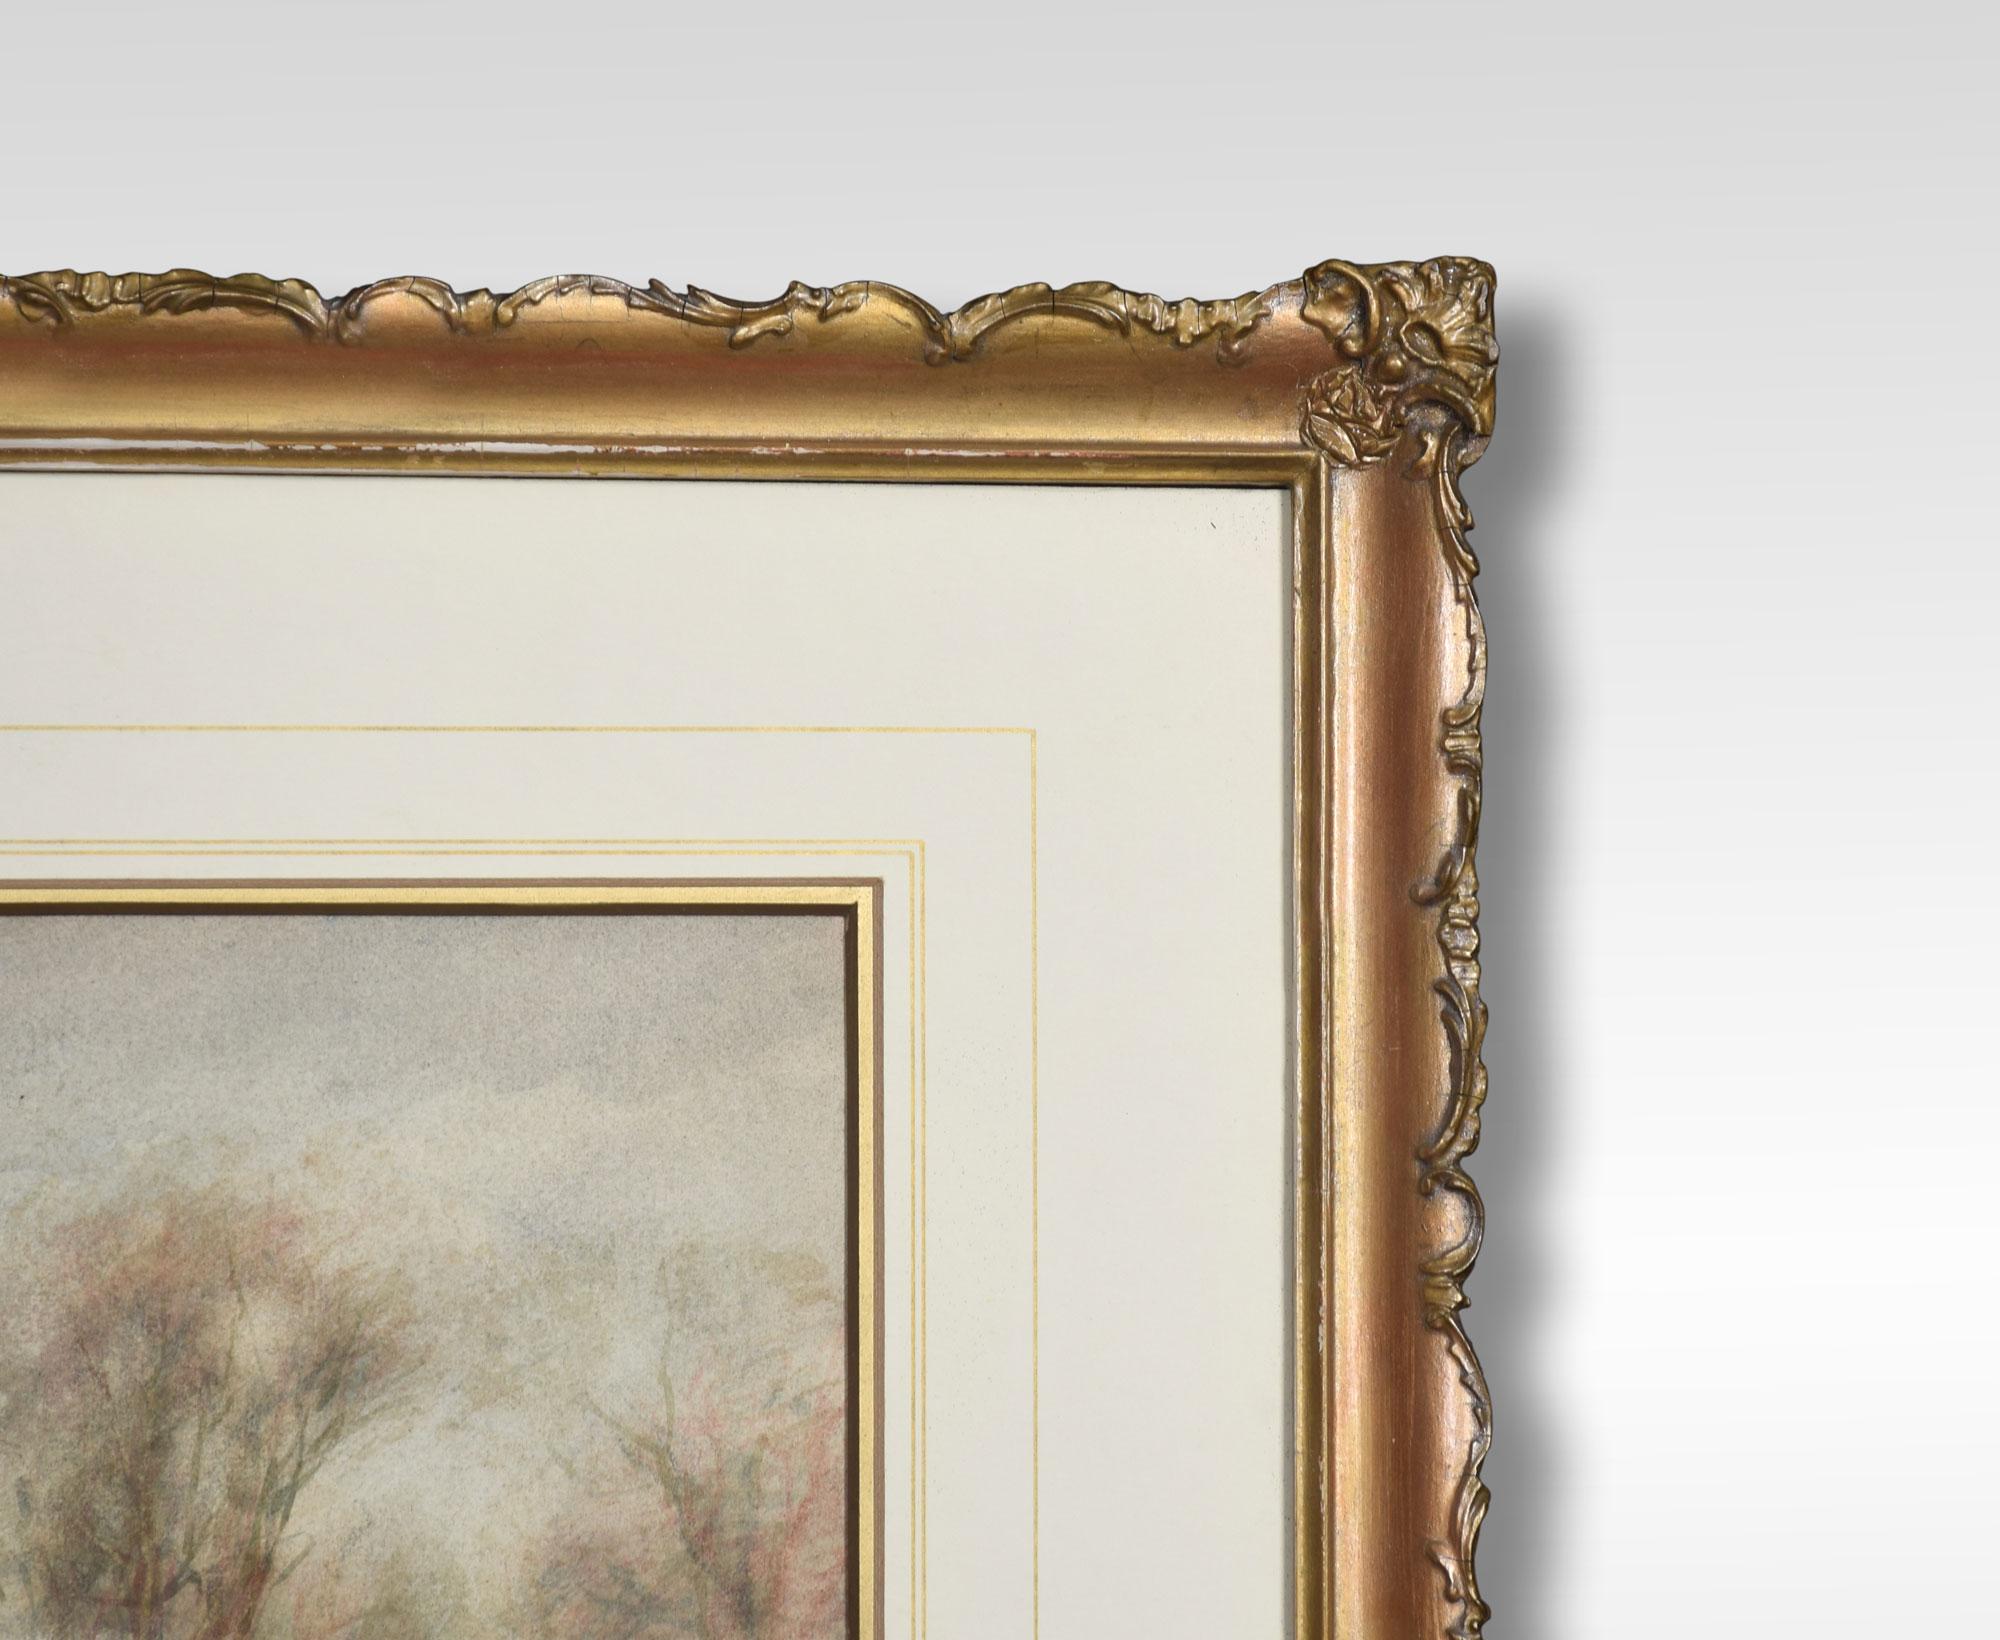 W Ramsey watercolor depicting a Shepard hearing up his flock. Incased in a gilded frame.
Dimensions:
Height 21 Inches
Width 27 Inches
Depth 1.5 Inches.